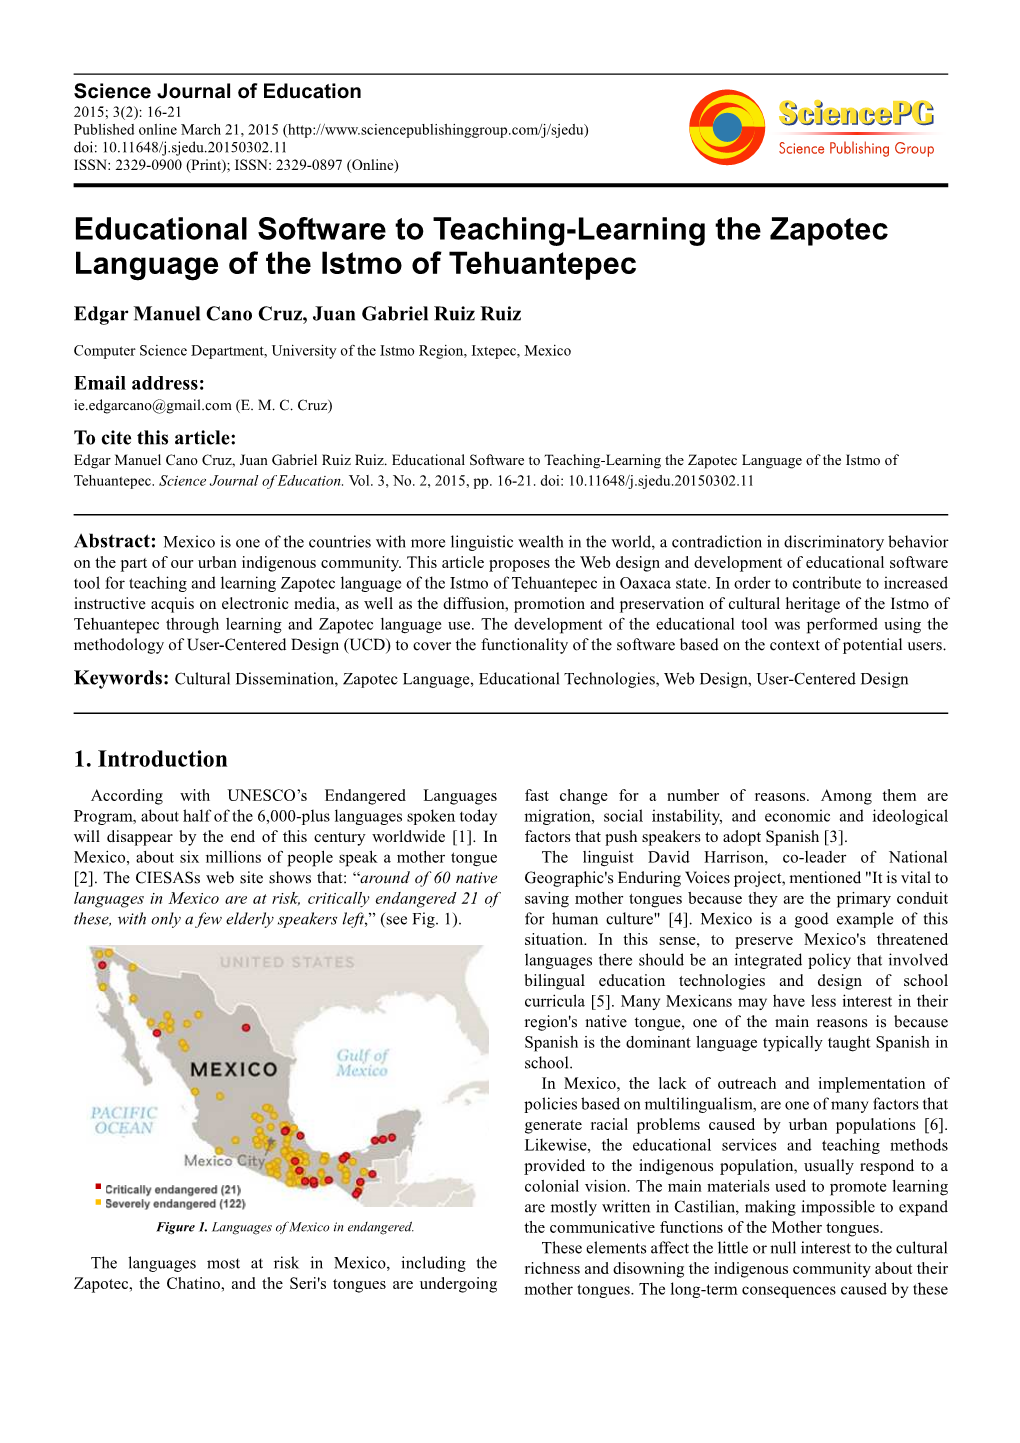 Educational Software to Teaching-Learning the Zapotec Language of the Istmo of Tehuantepec